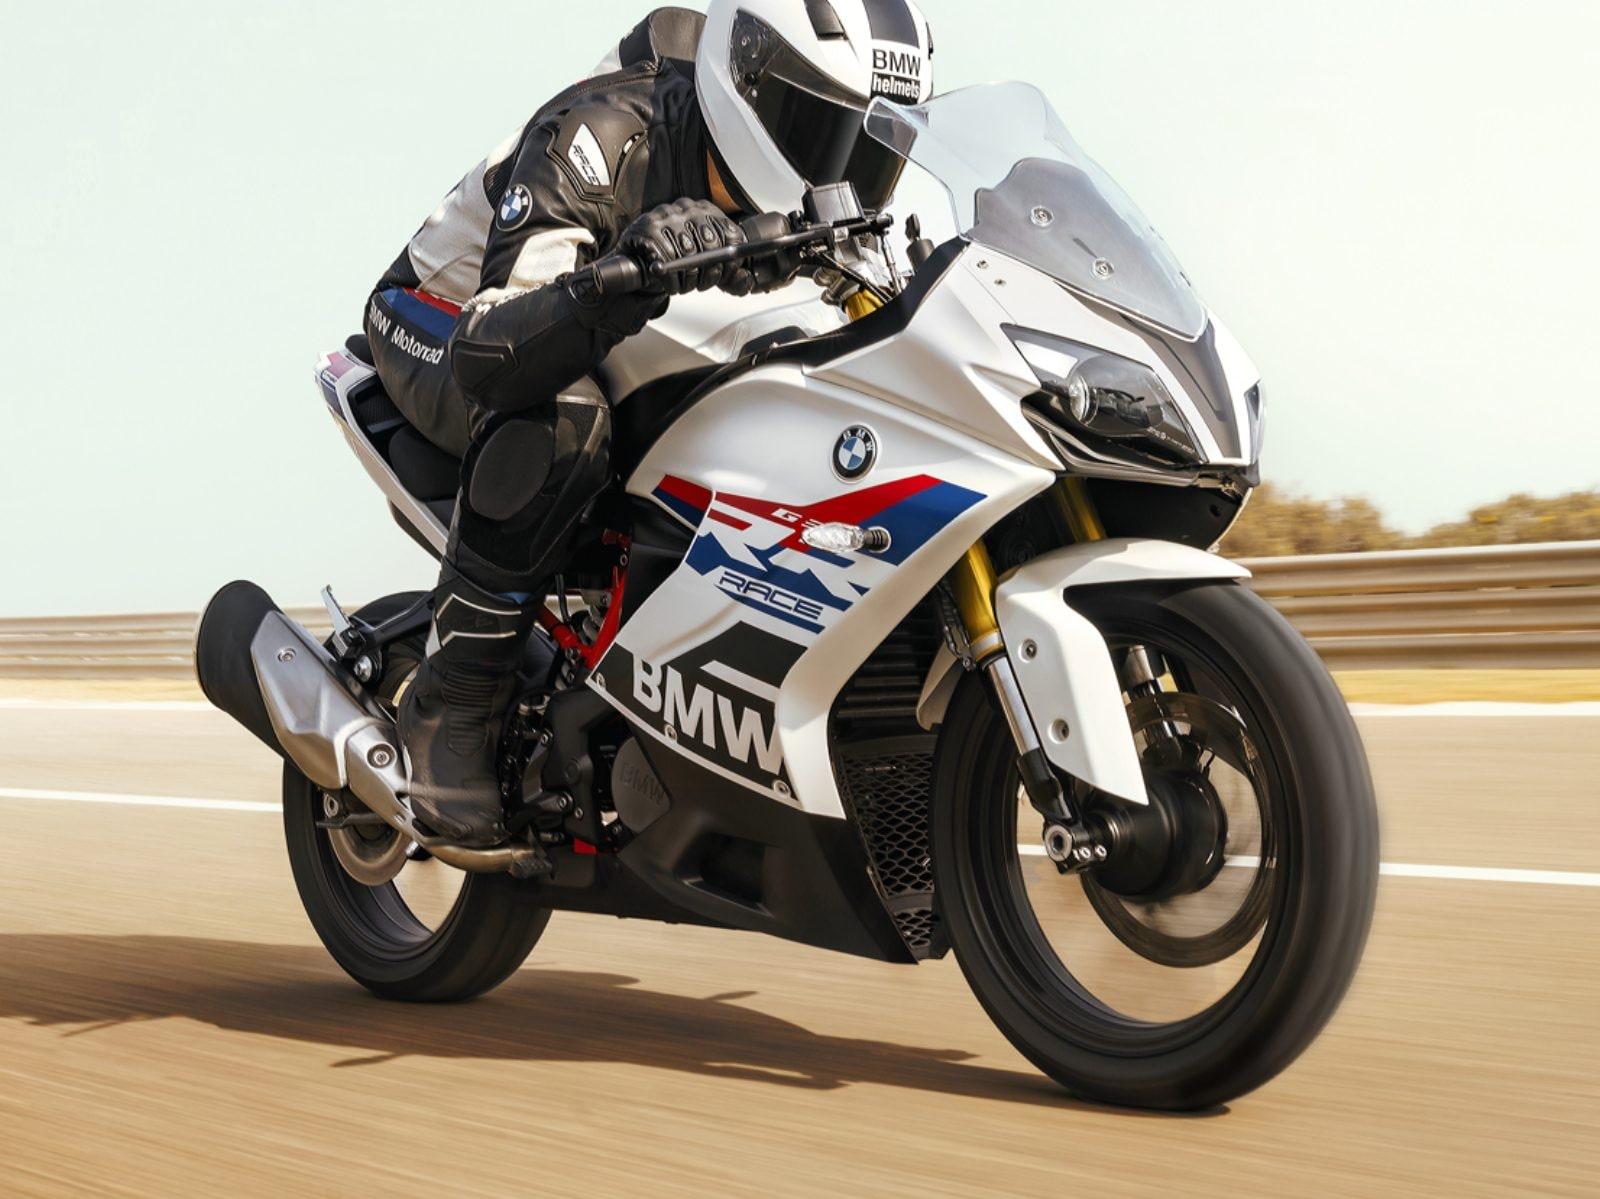 Bmw G Rr Launched In India At Rs Lakh News18